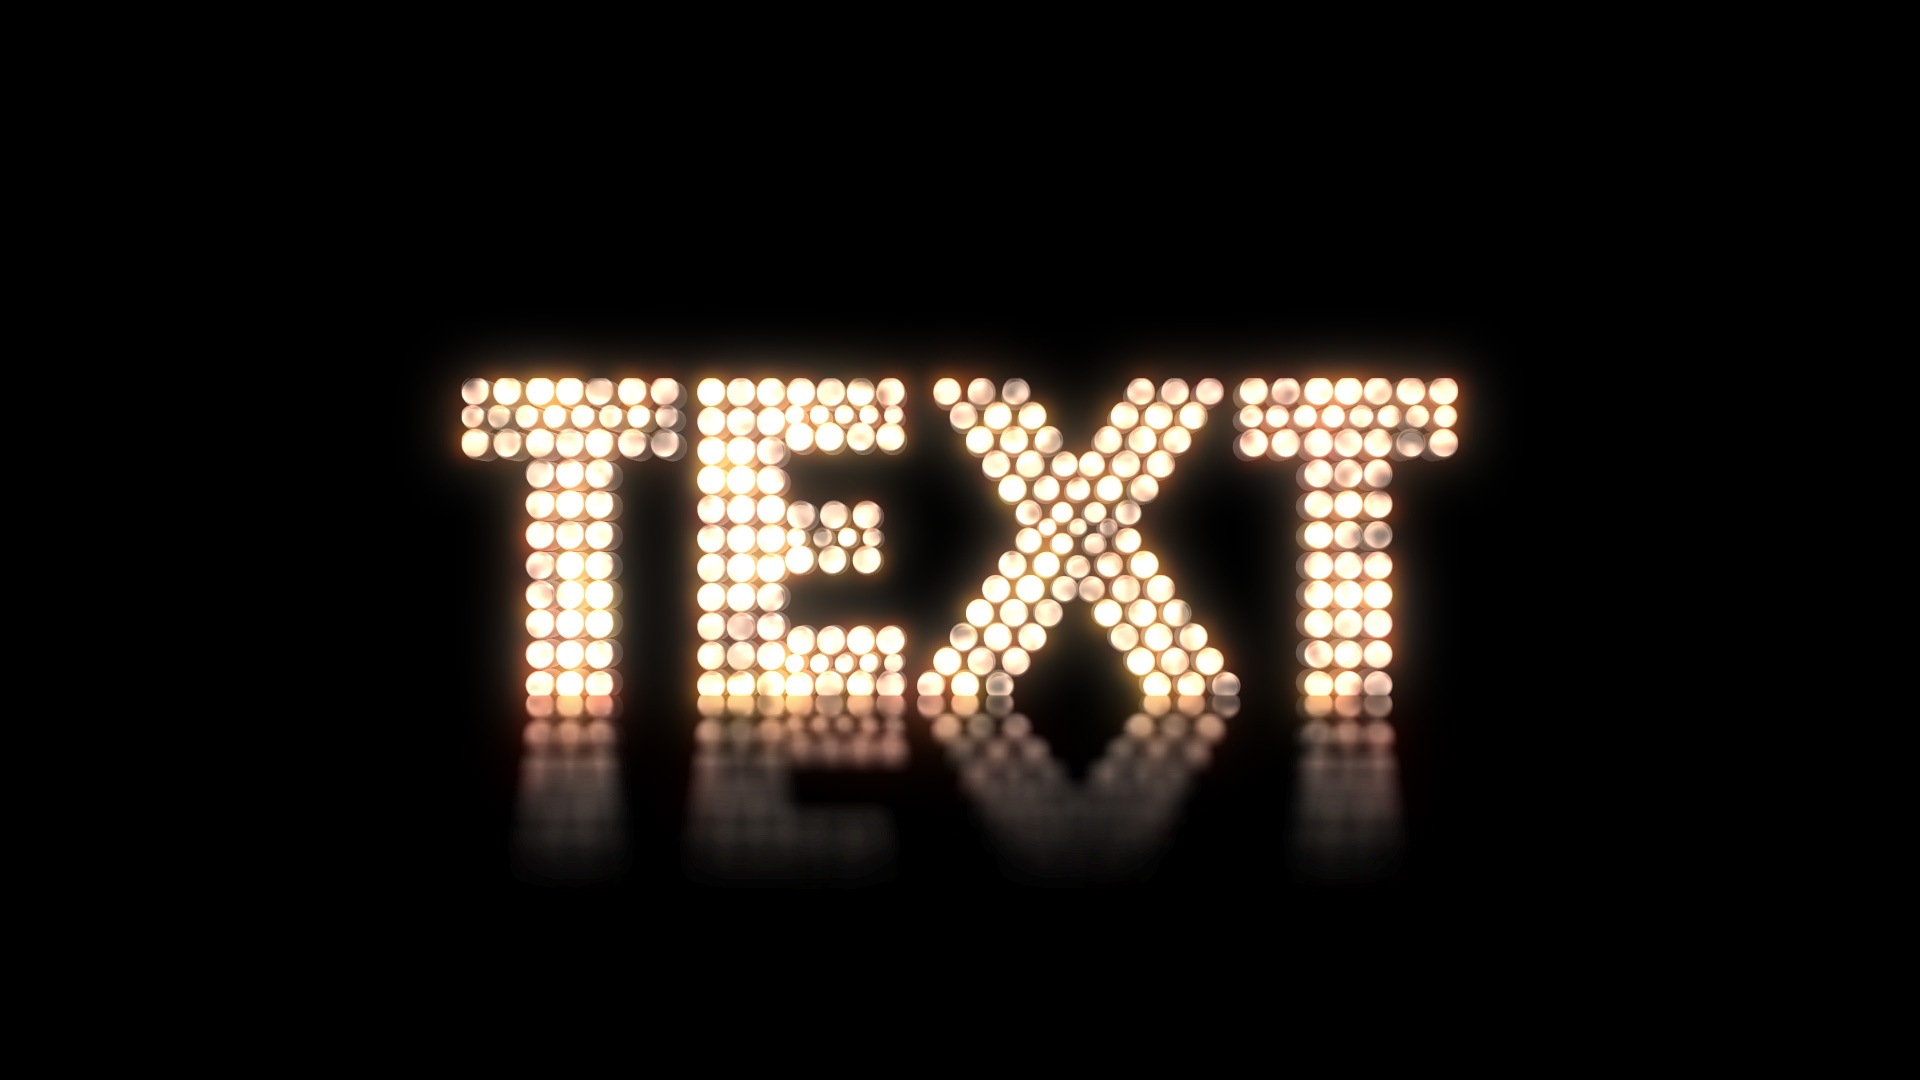 Текста без ап. Light up текст. Custom text. Up text. Let your Shine Glow text.